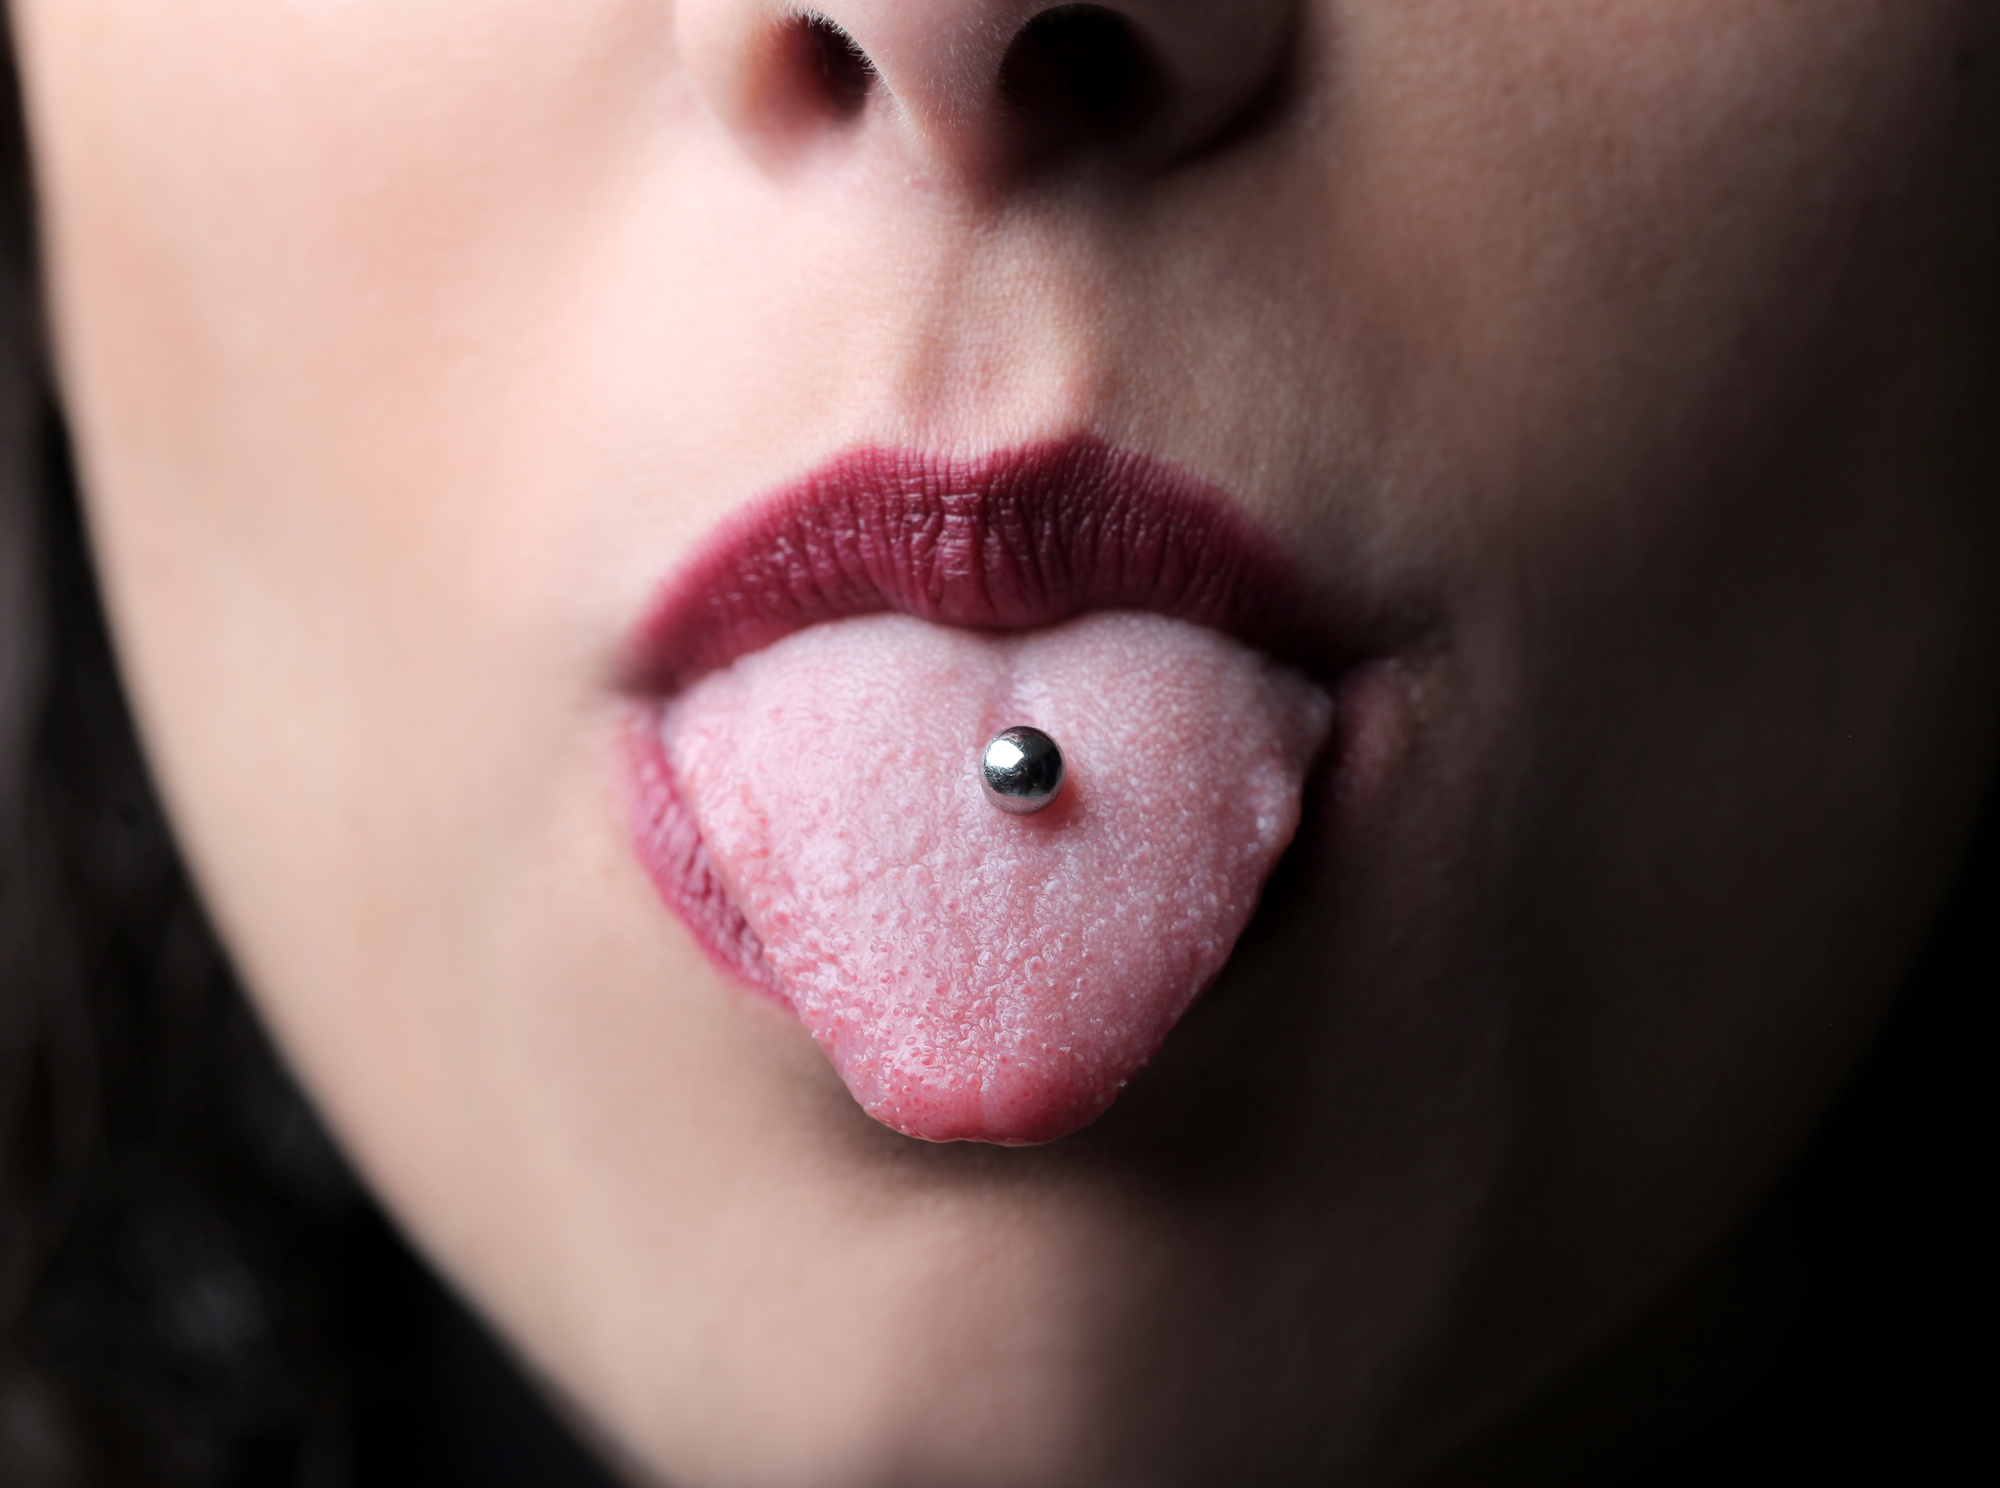 Piercing Aftercare: How to Maintain Your Piercings